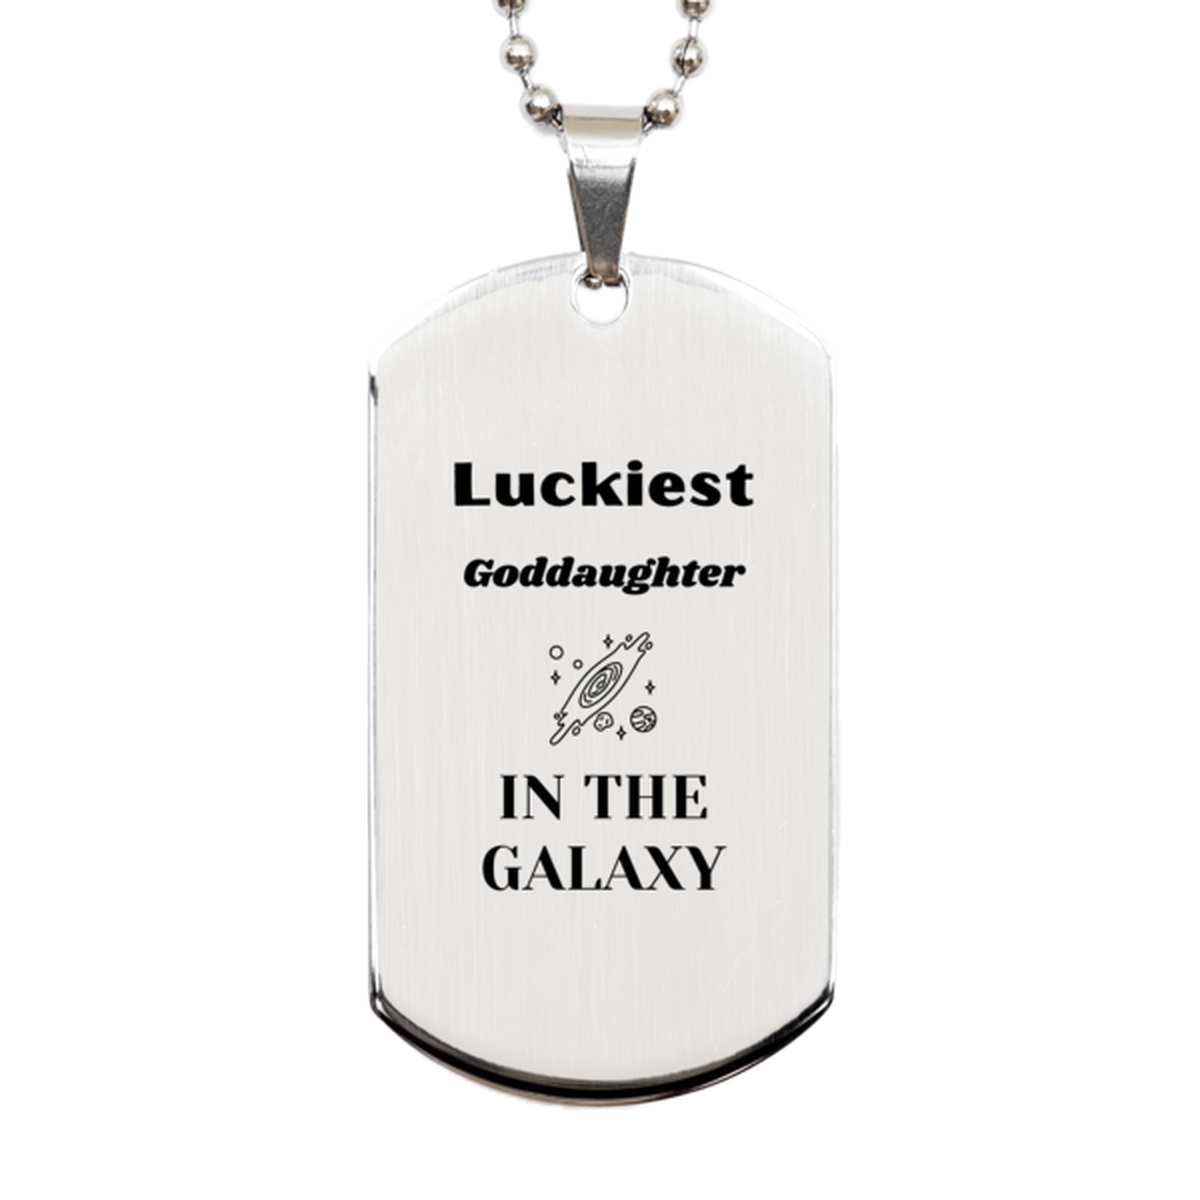 Luckiest Goddaughter in the Galaxy, To My Goddaughter Engraved Gifts, Christmas Goddaughter Silver Dog Tag Gifts, X-mas Birthday Unique Gifts For Goddaughter Men Women